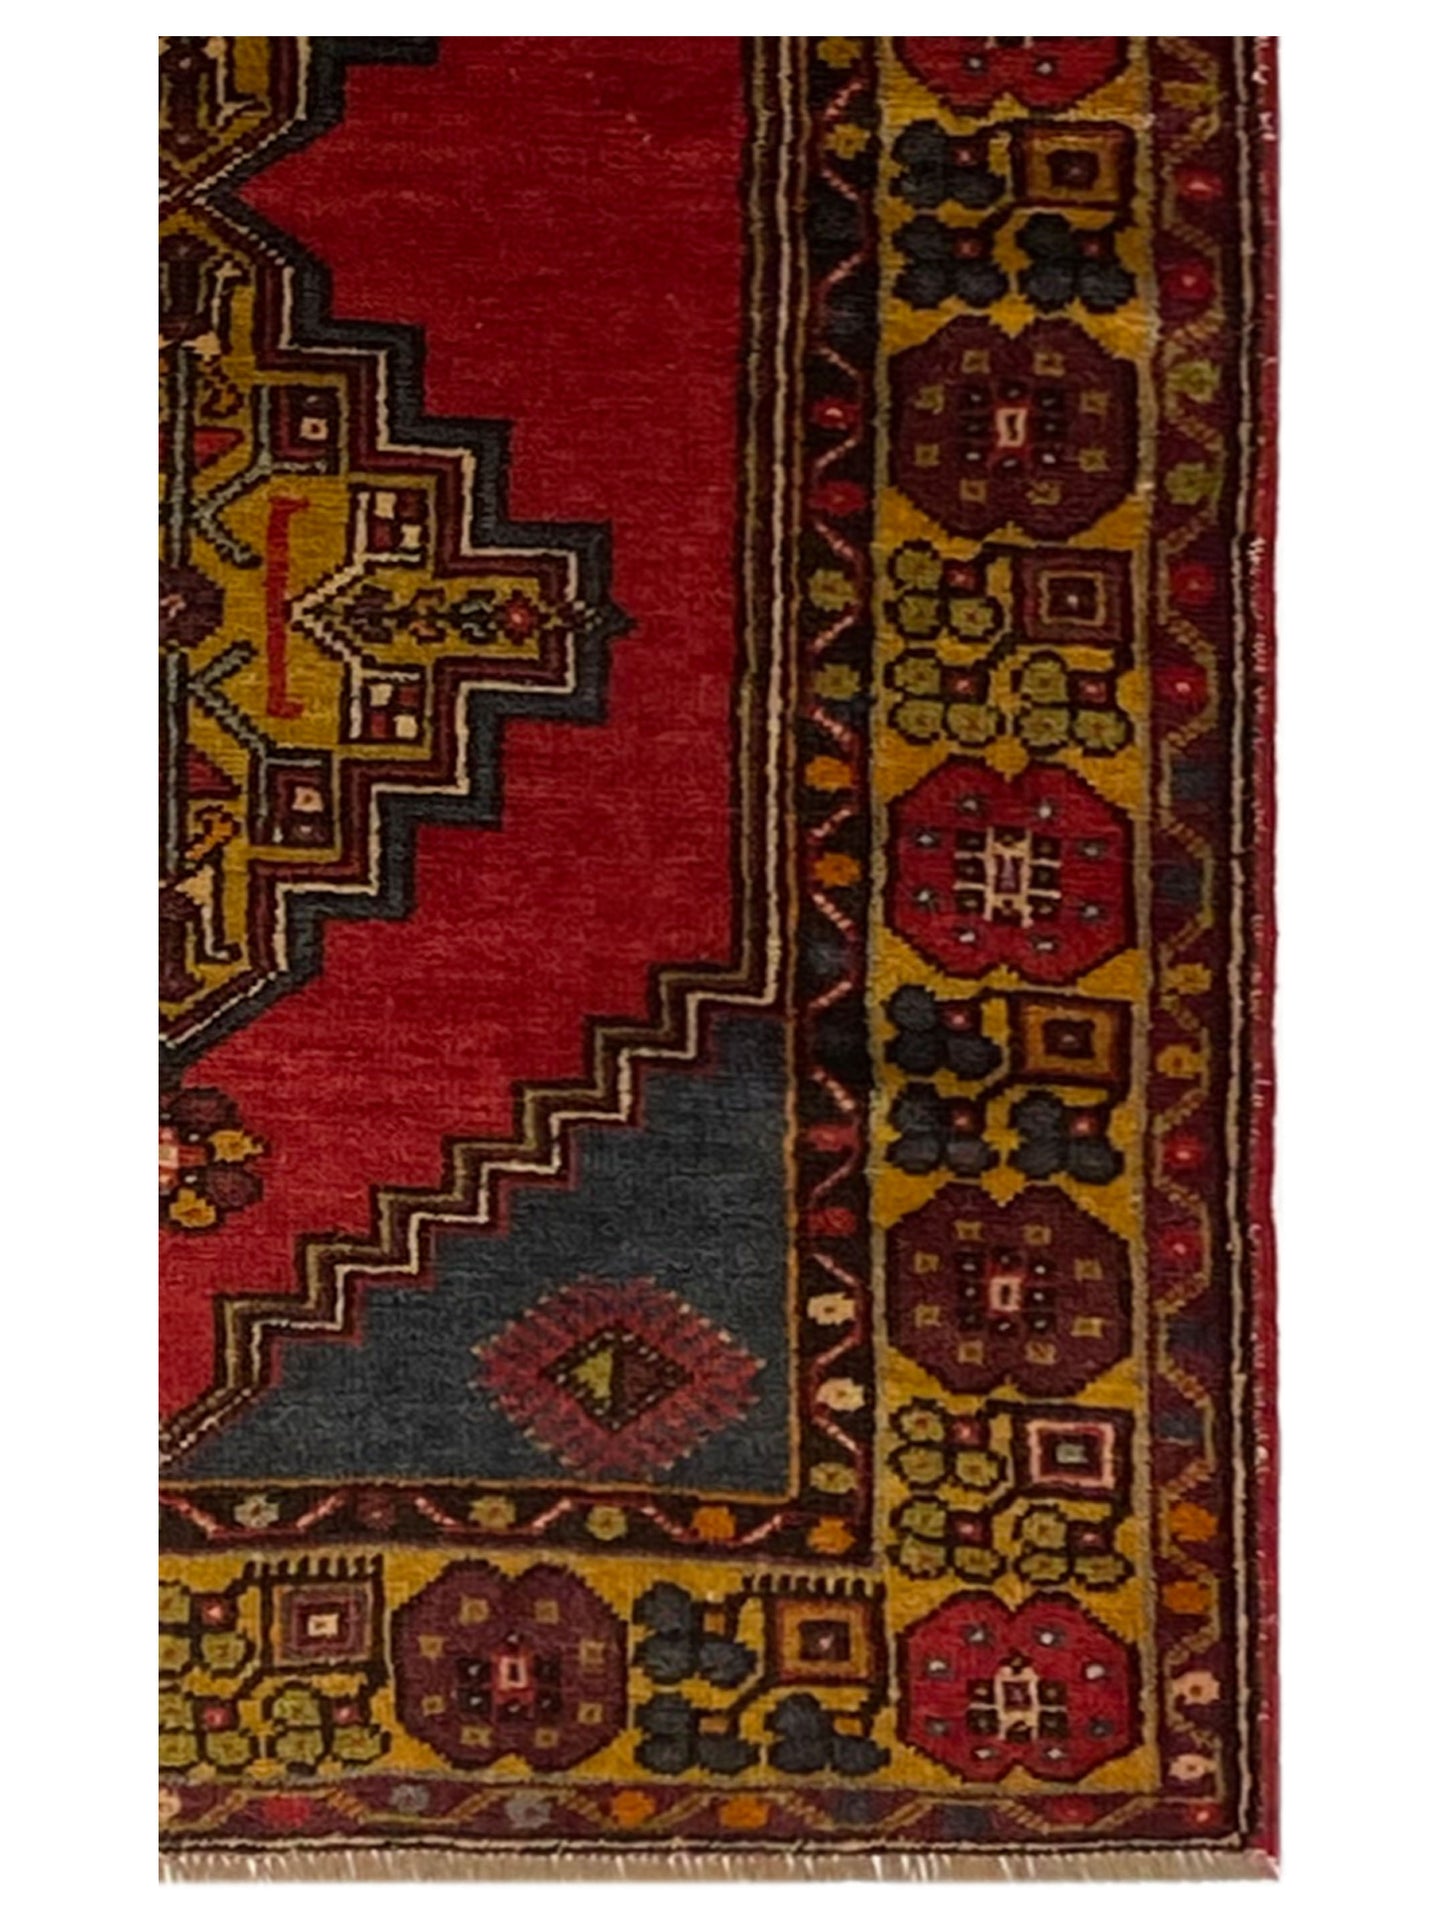 Artisan Angelina  Red Gold Vintage Knotted Rug